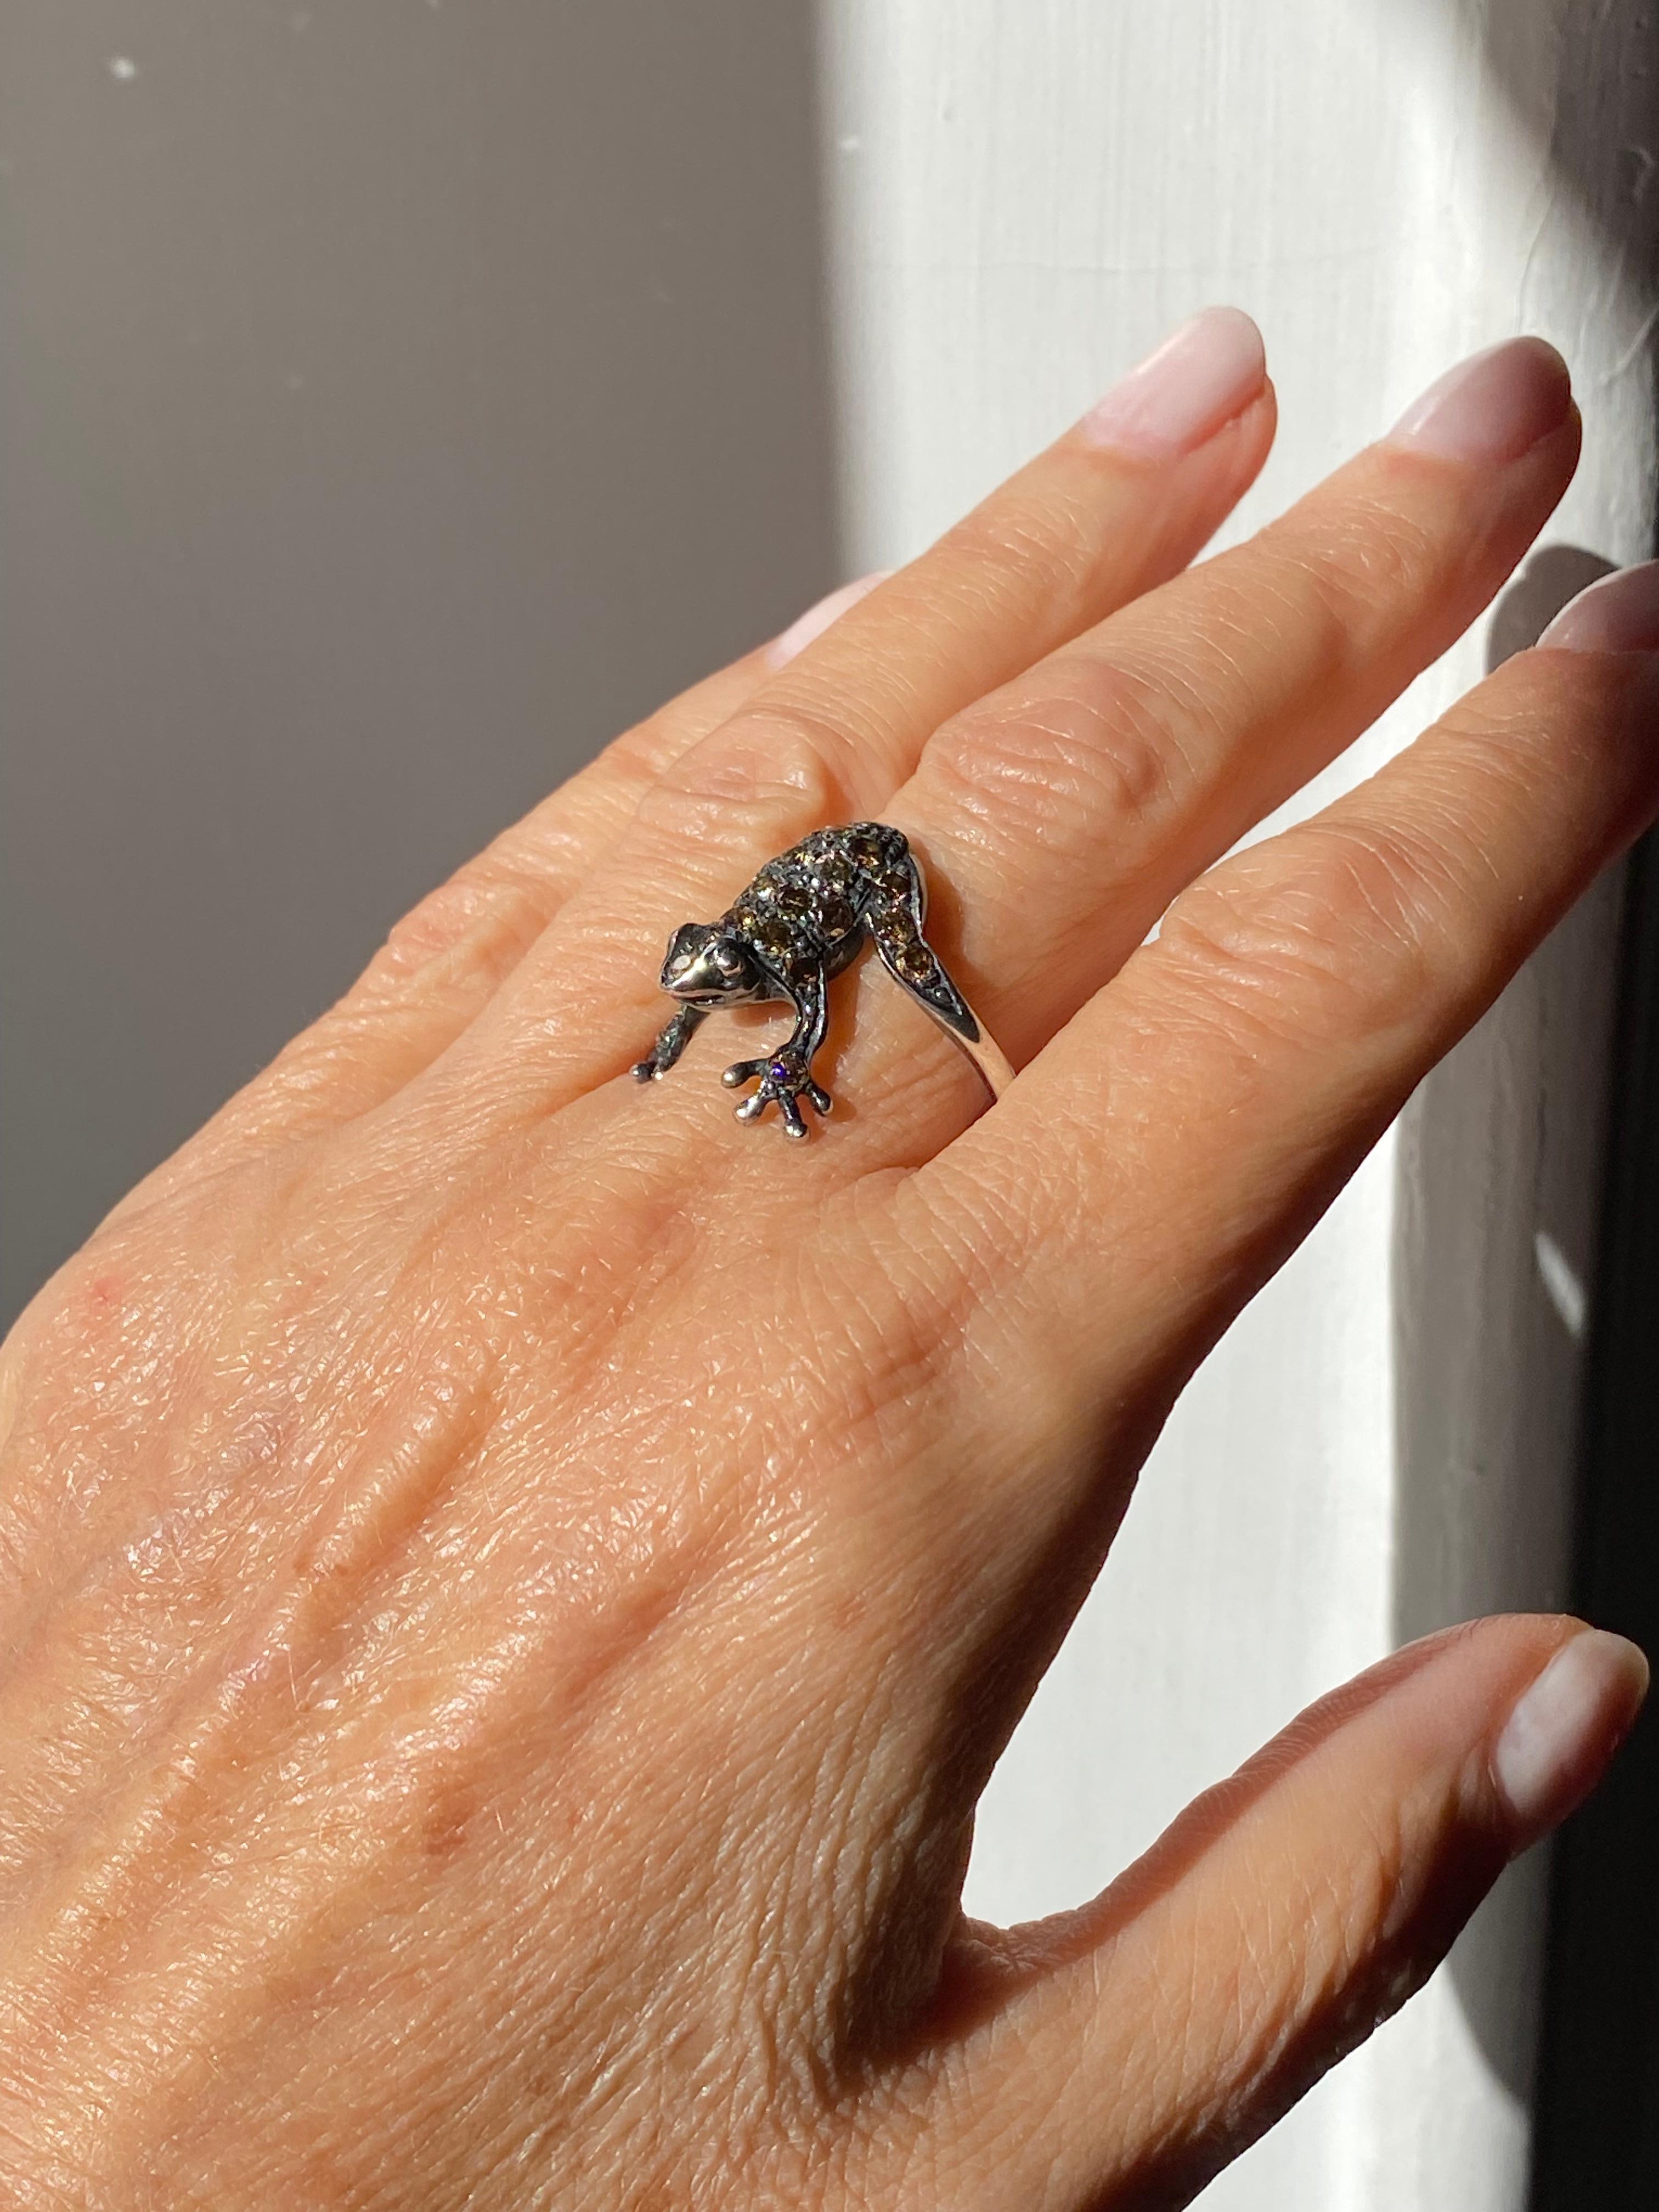 Rossella Ugolini design animal collection 18 karats white black rhodium gold Frog design ring
A beautiful  ring handcrafted in 18 karats white gold and enriched with brilliant cut brown diamonds.
Available in two weeks by order also in yellow